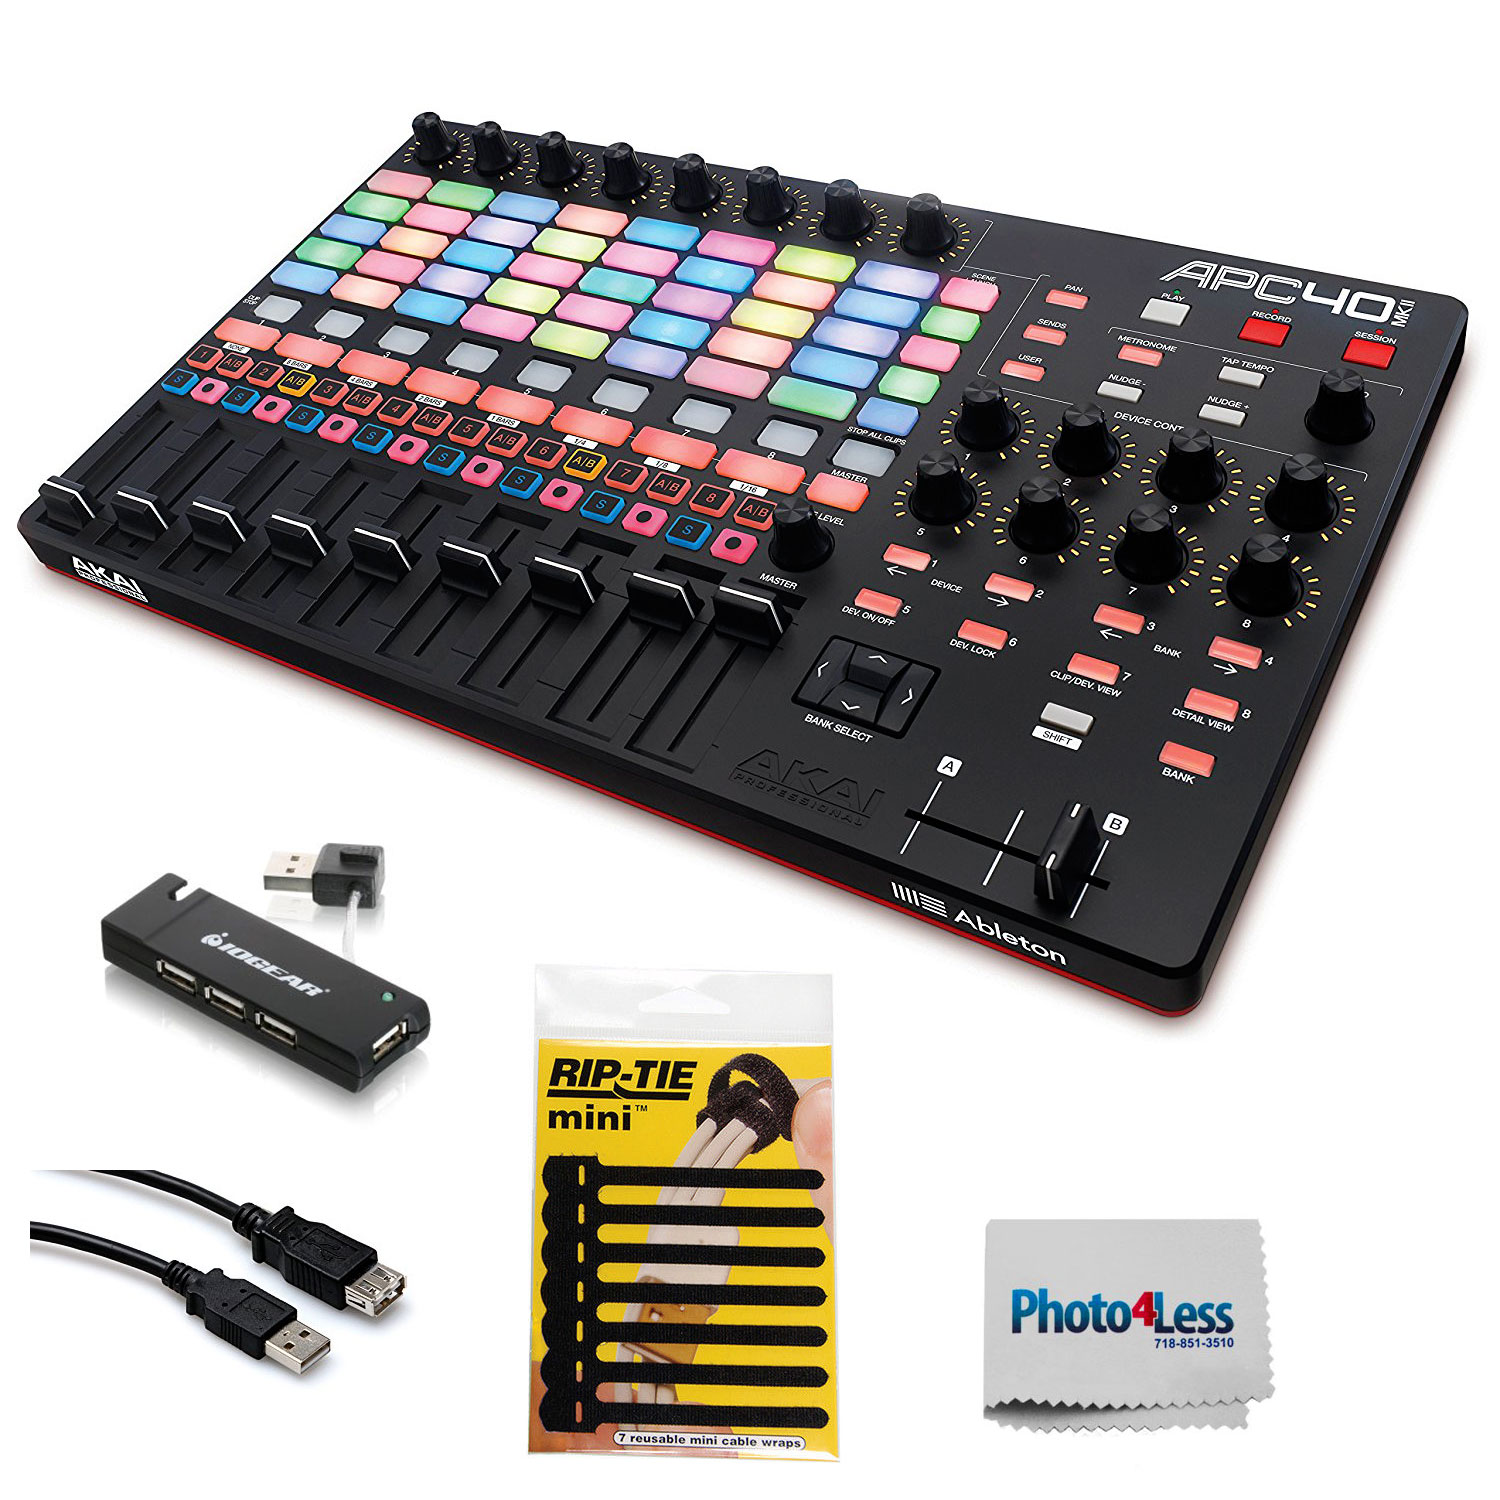 Akai Professional APC40 MKII Ableton Live Performance Controller with Ableton Live Lite Download Cable 4-Port USB Pack of Cable ties & Photo4less Cleaning Cloth